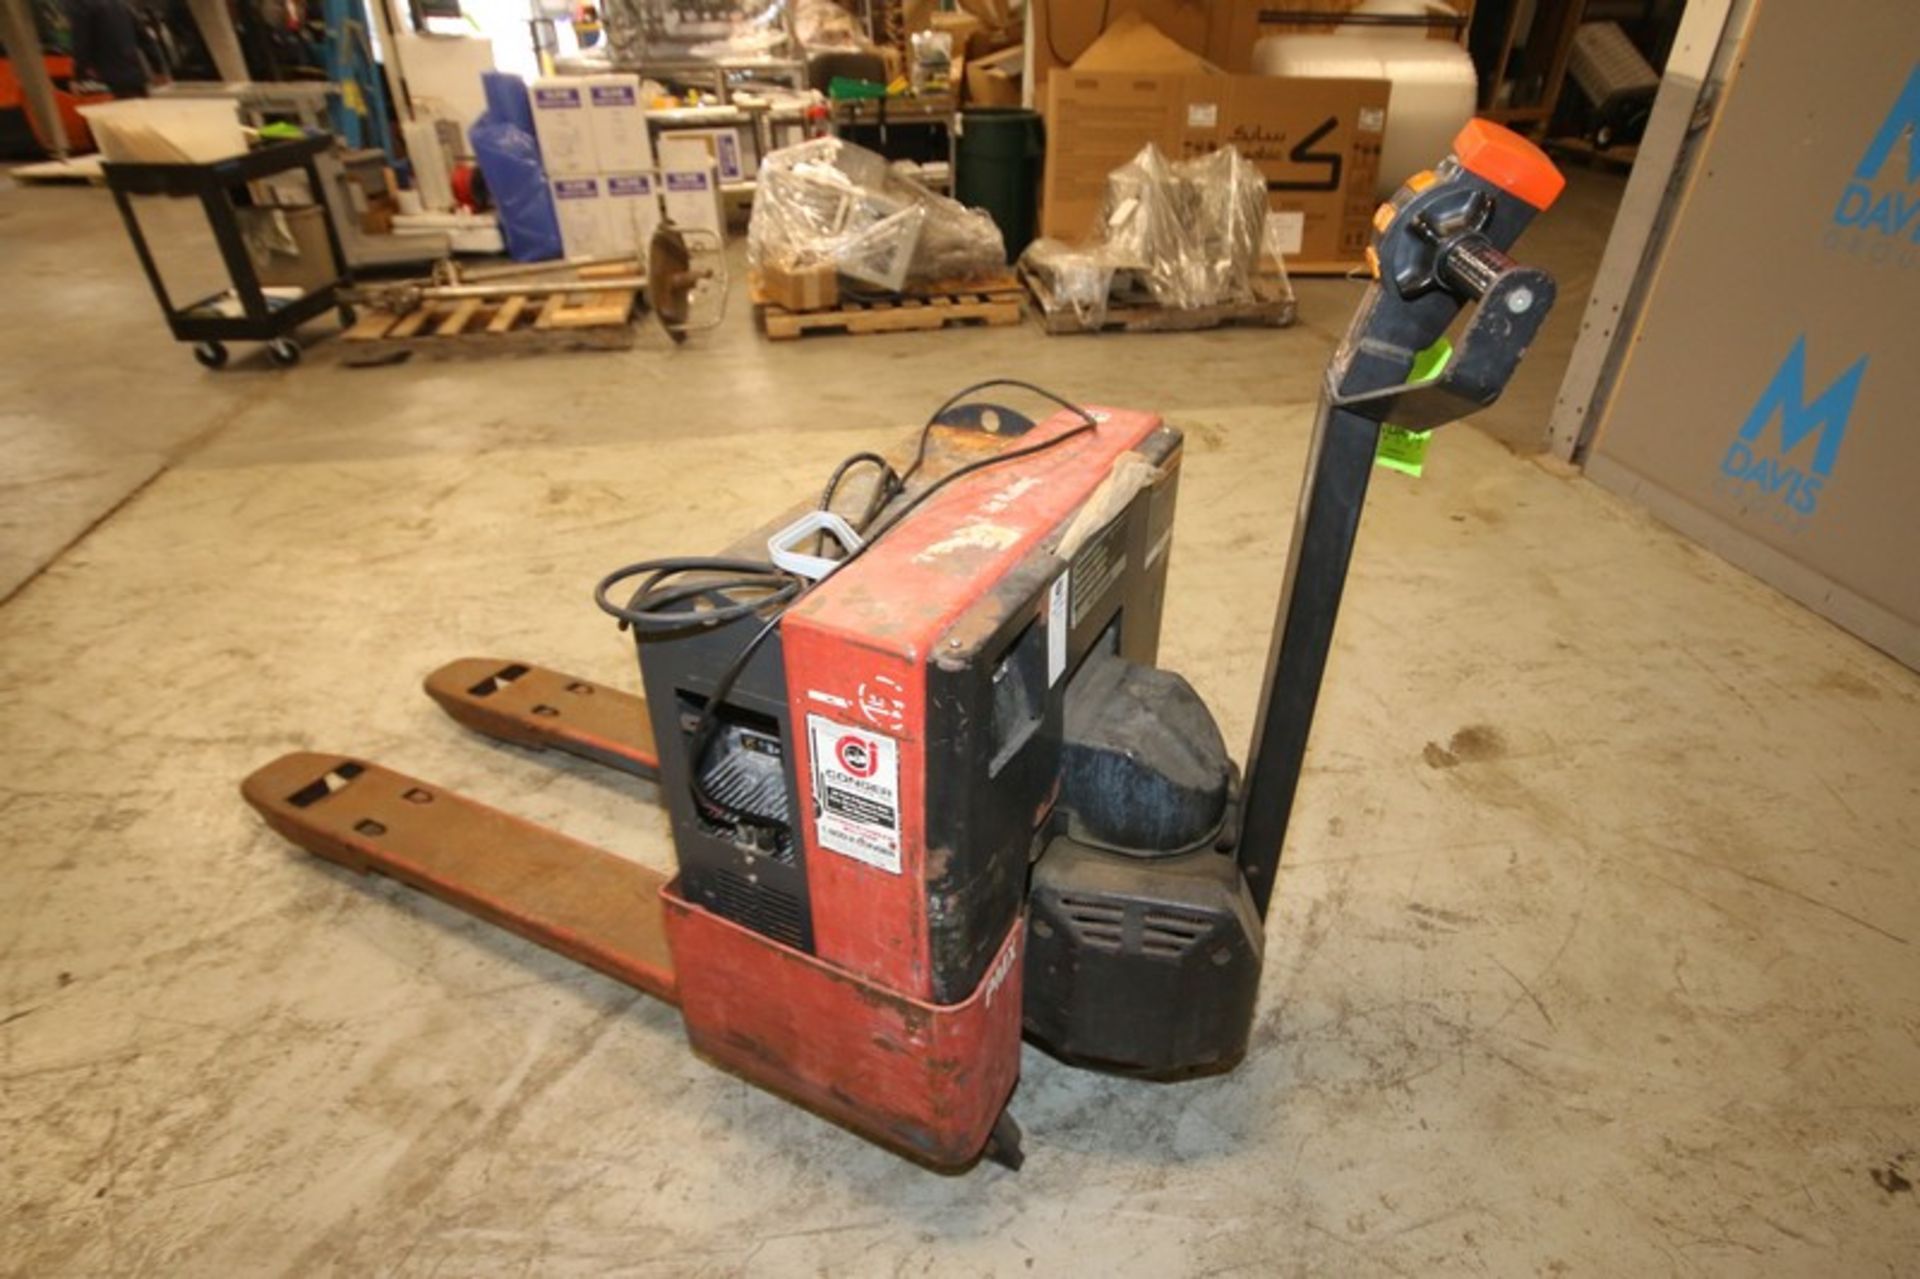 Prime Mover 4,500 lbs. 24V Electric Pallet Jack, Model PMX, PMX0027153005, with Self Contained - Image 3 of 4